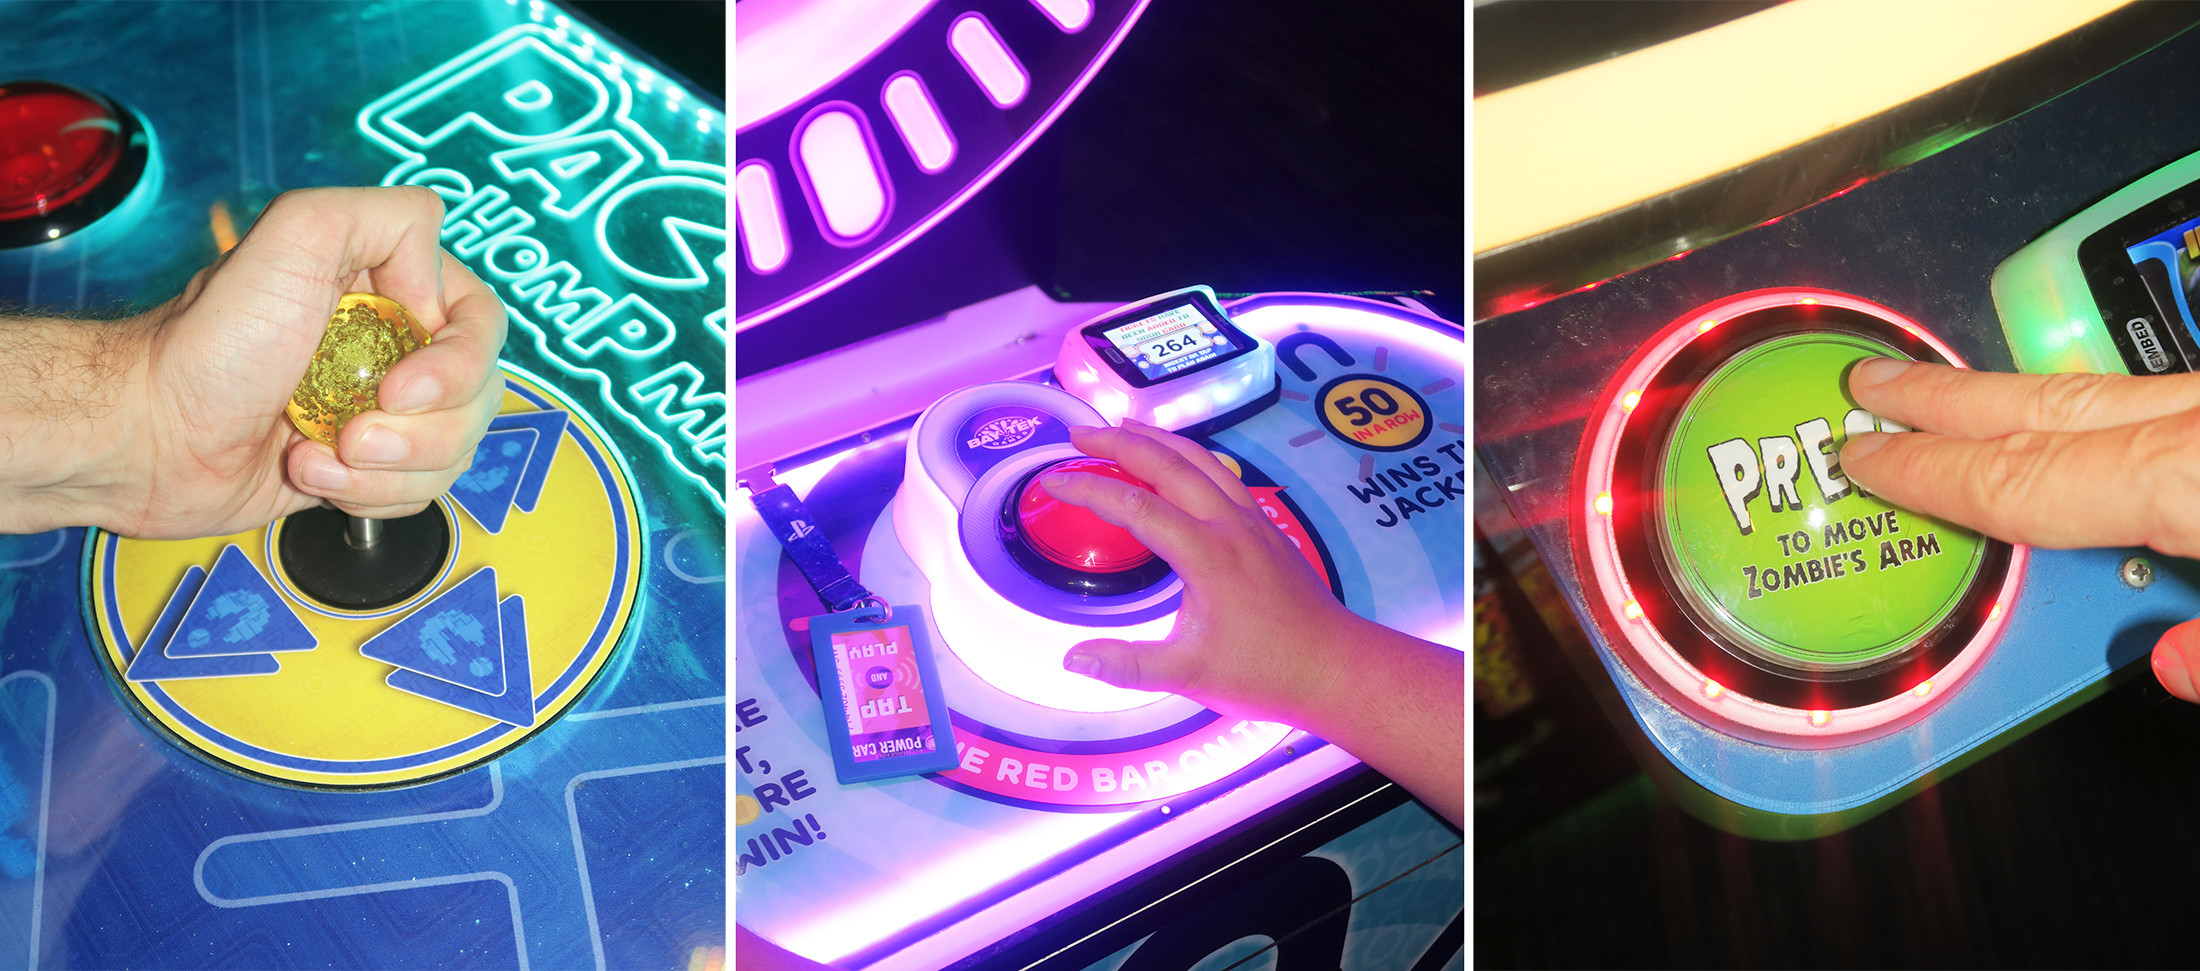 A split image showing three close ups of hands playing arcade games